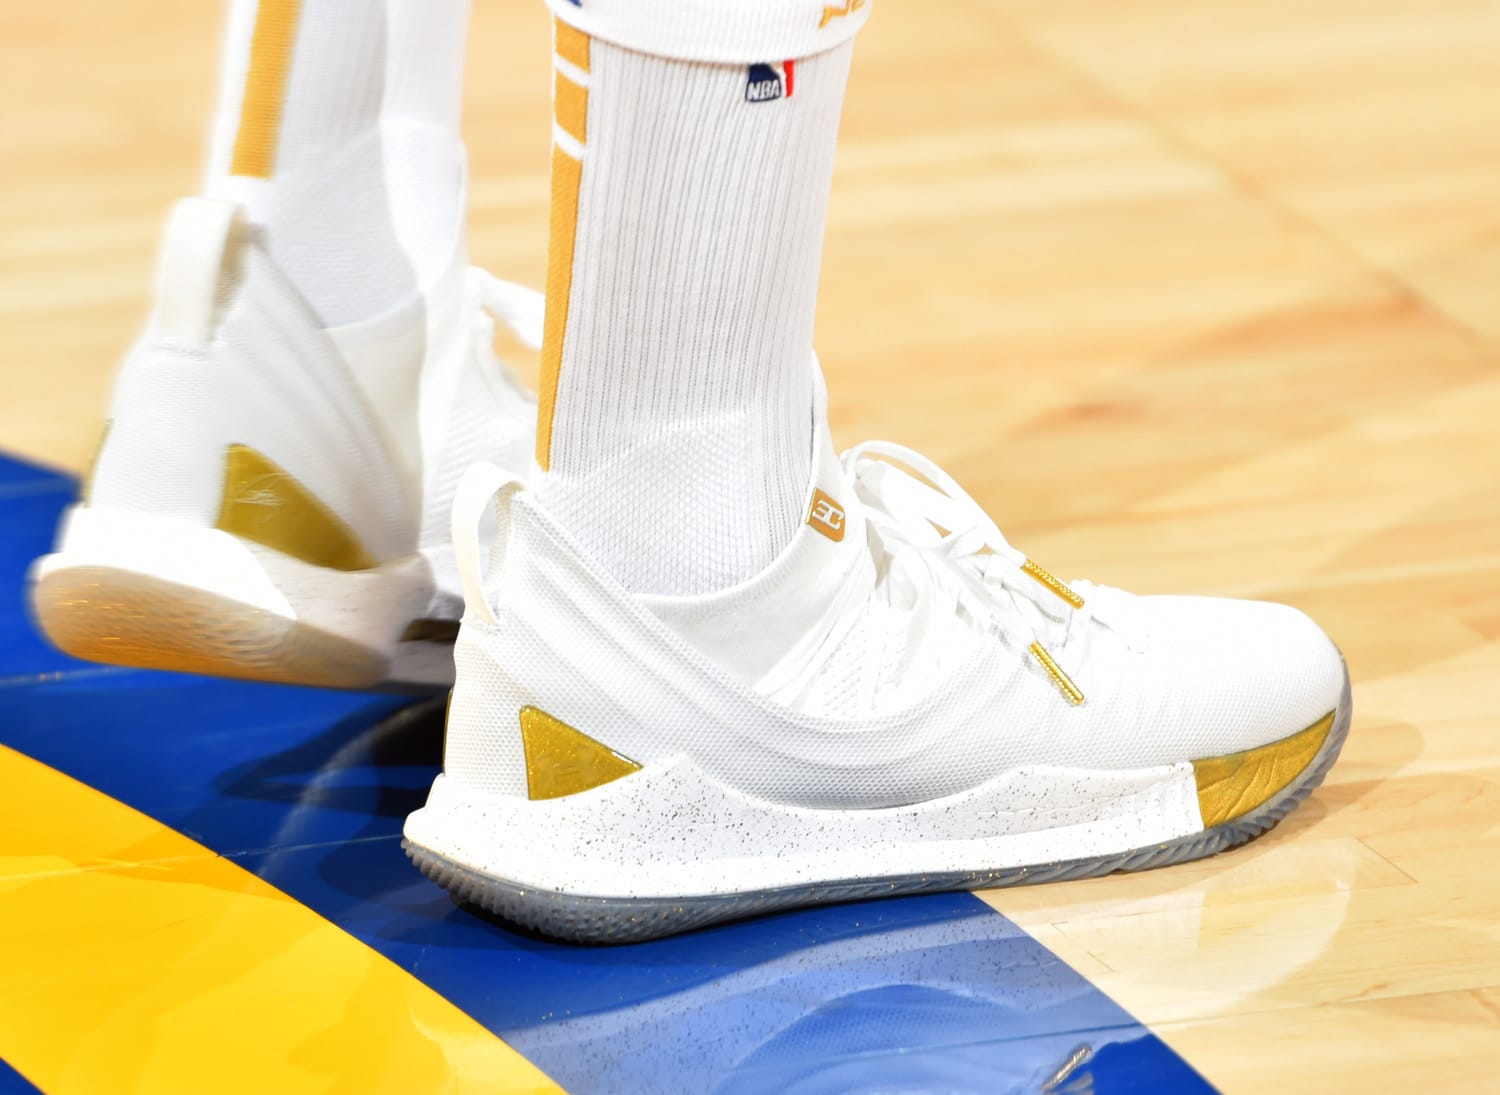 Stephen Curry - Under Armour Curry 5